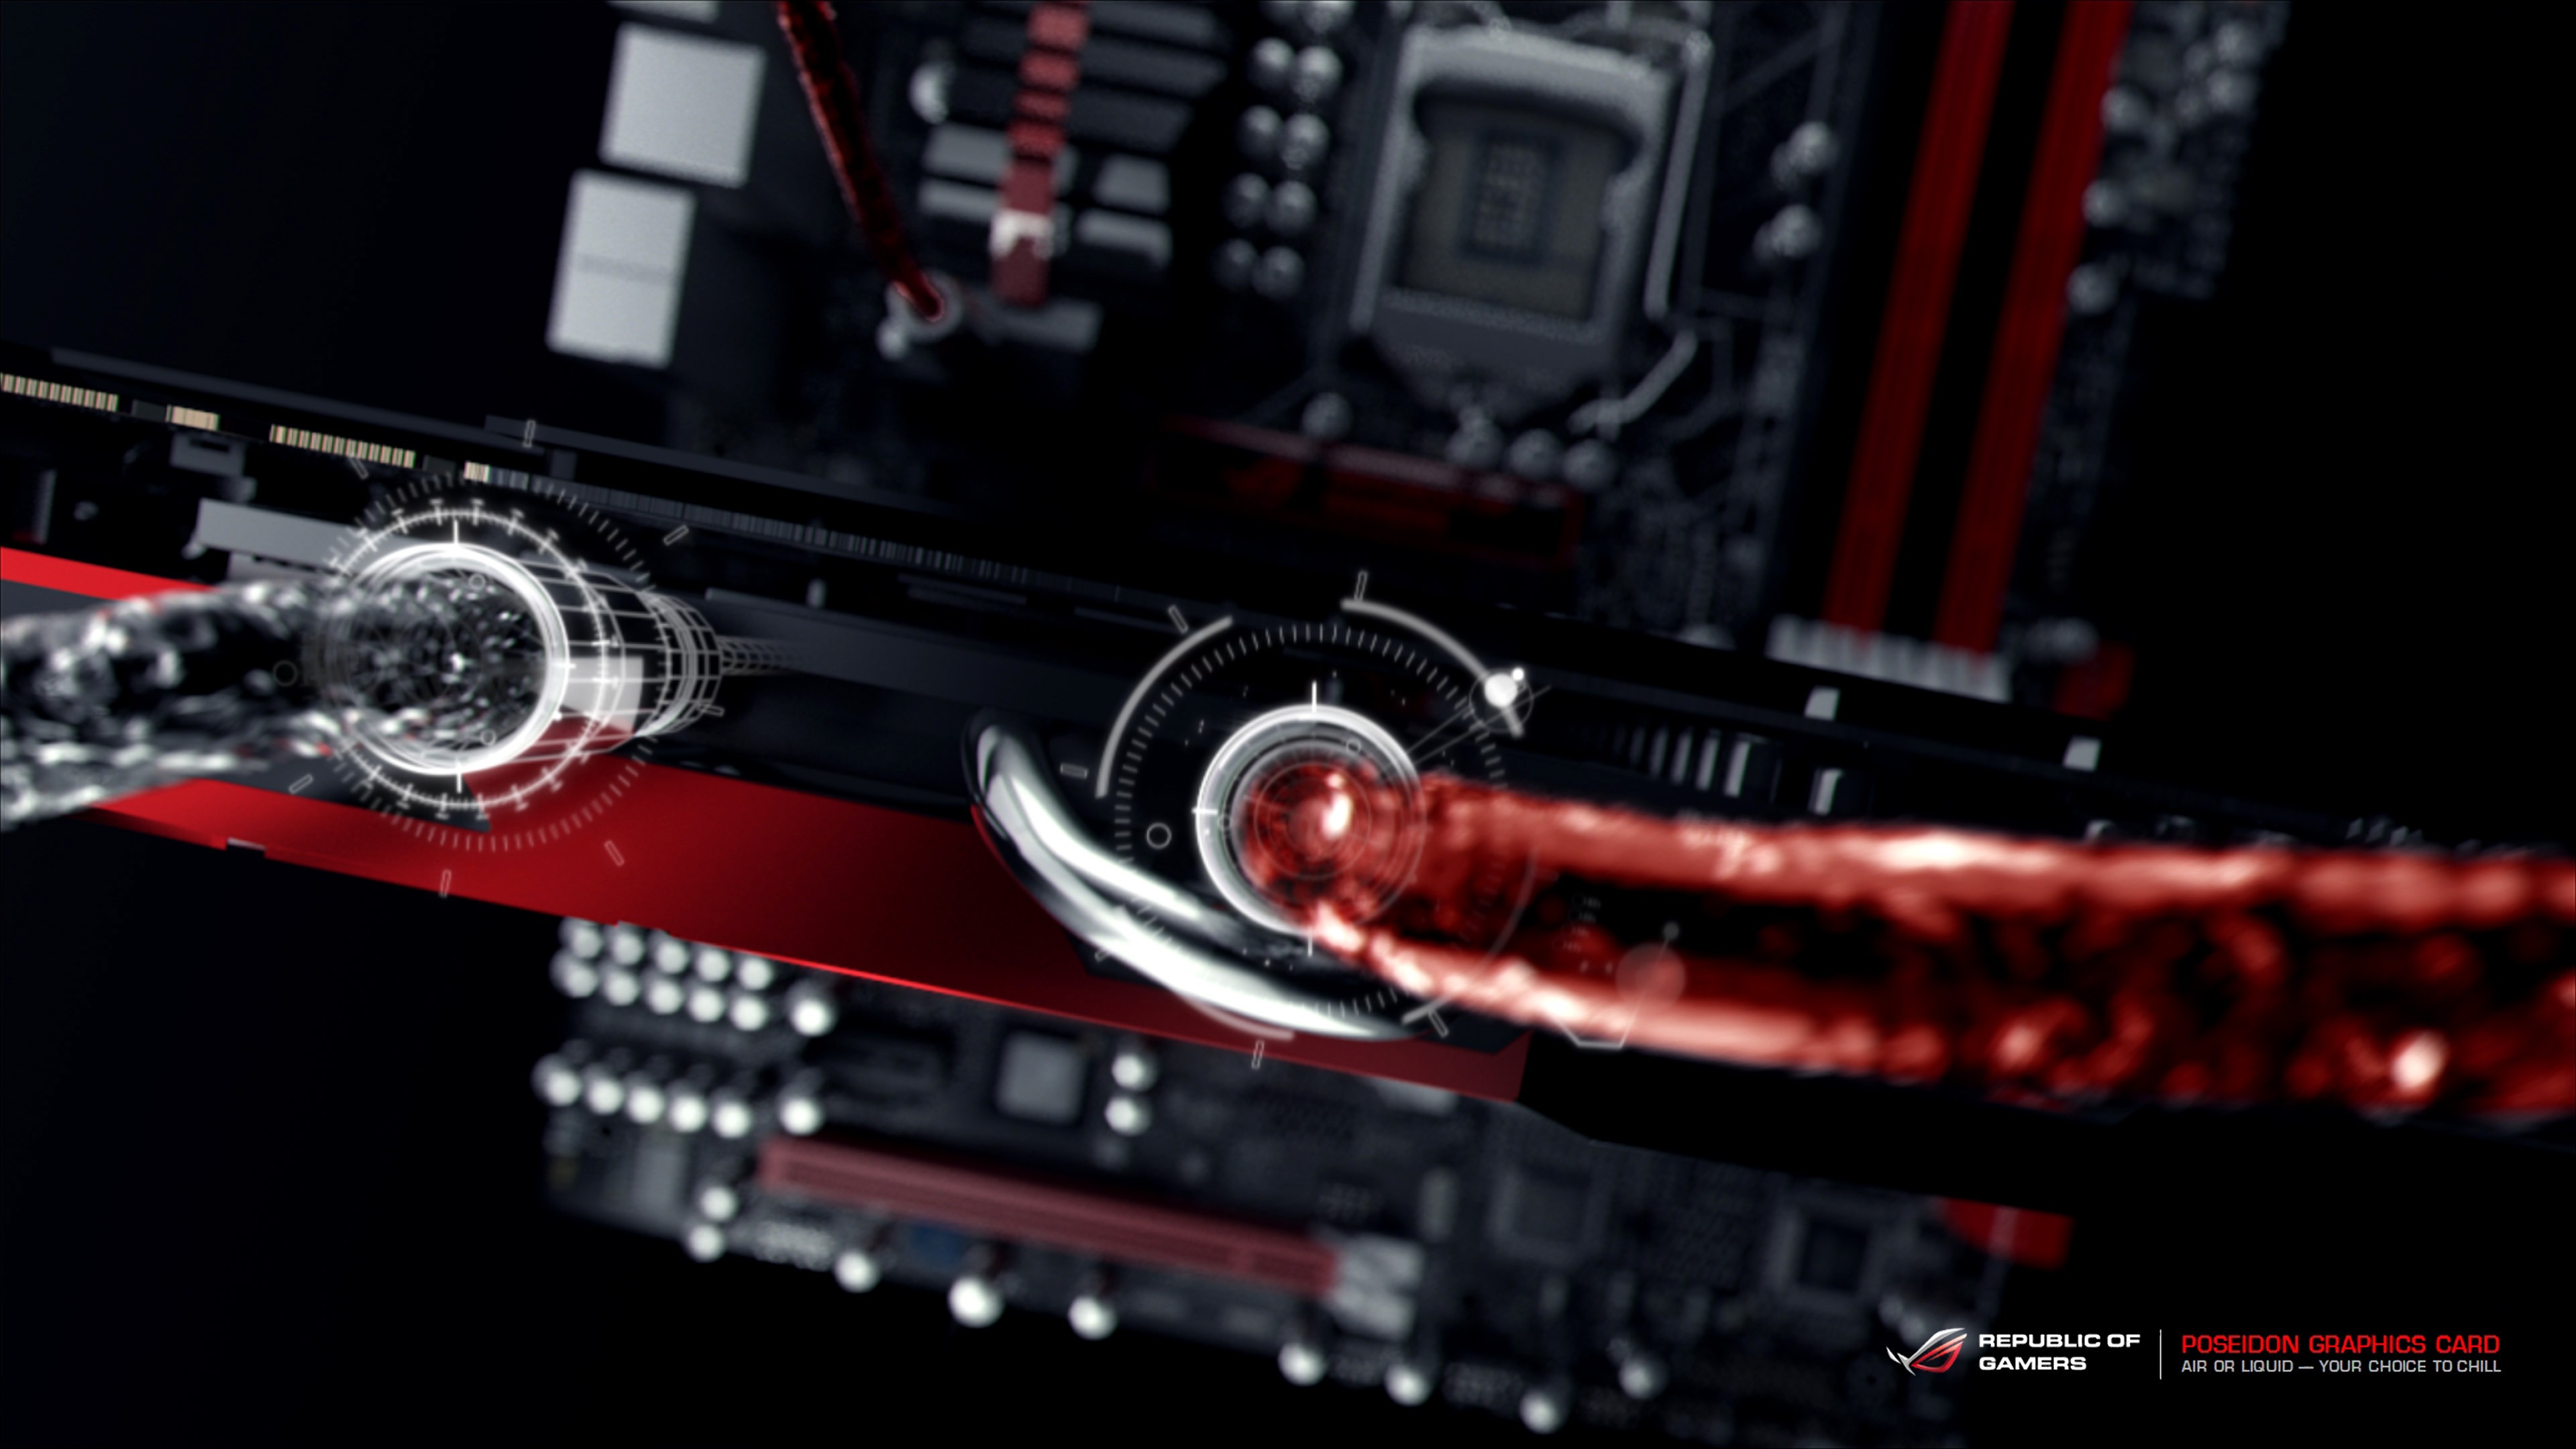 General 3840x2160 Republic of Gamers computer PC gaming technology GPUs water cooling hardware